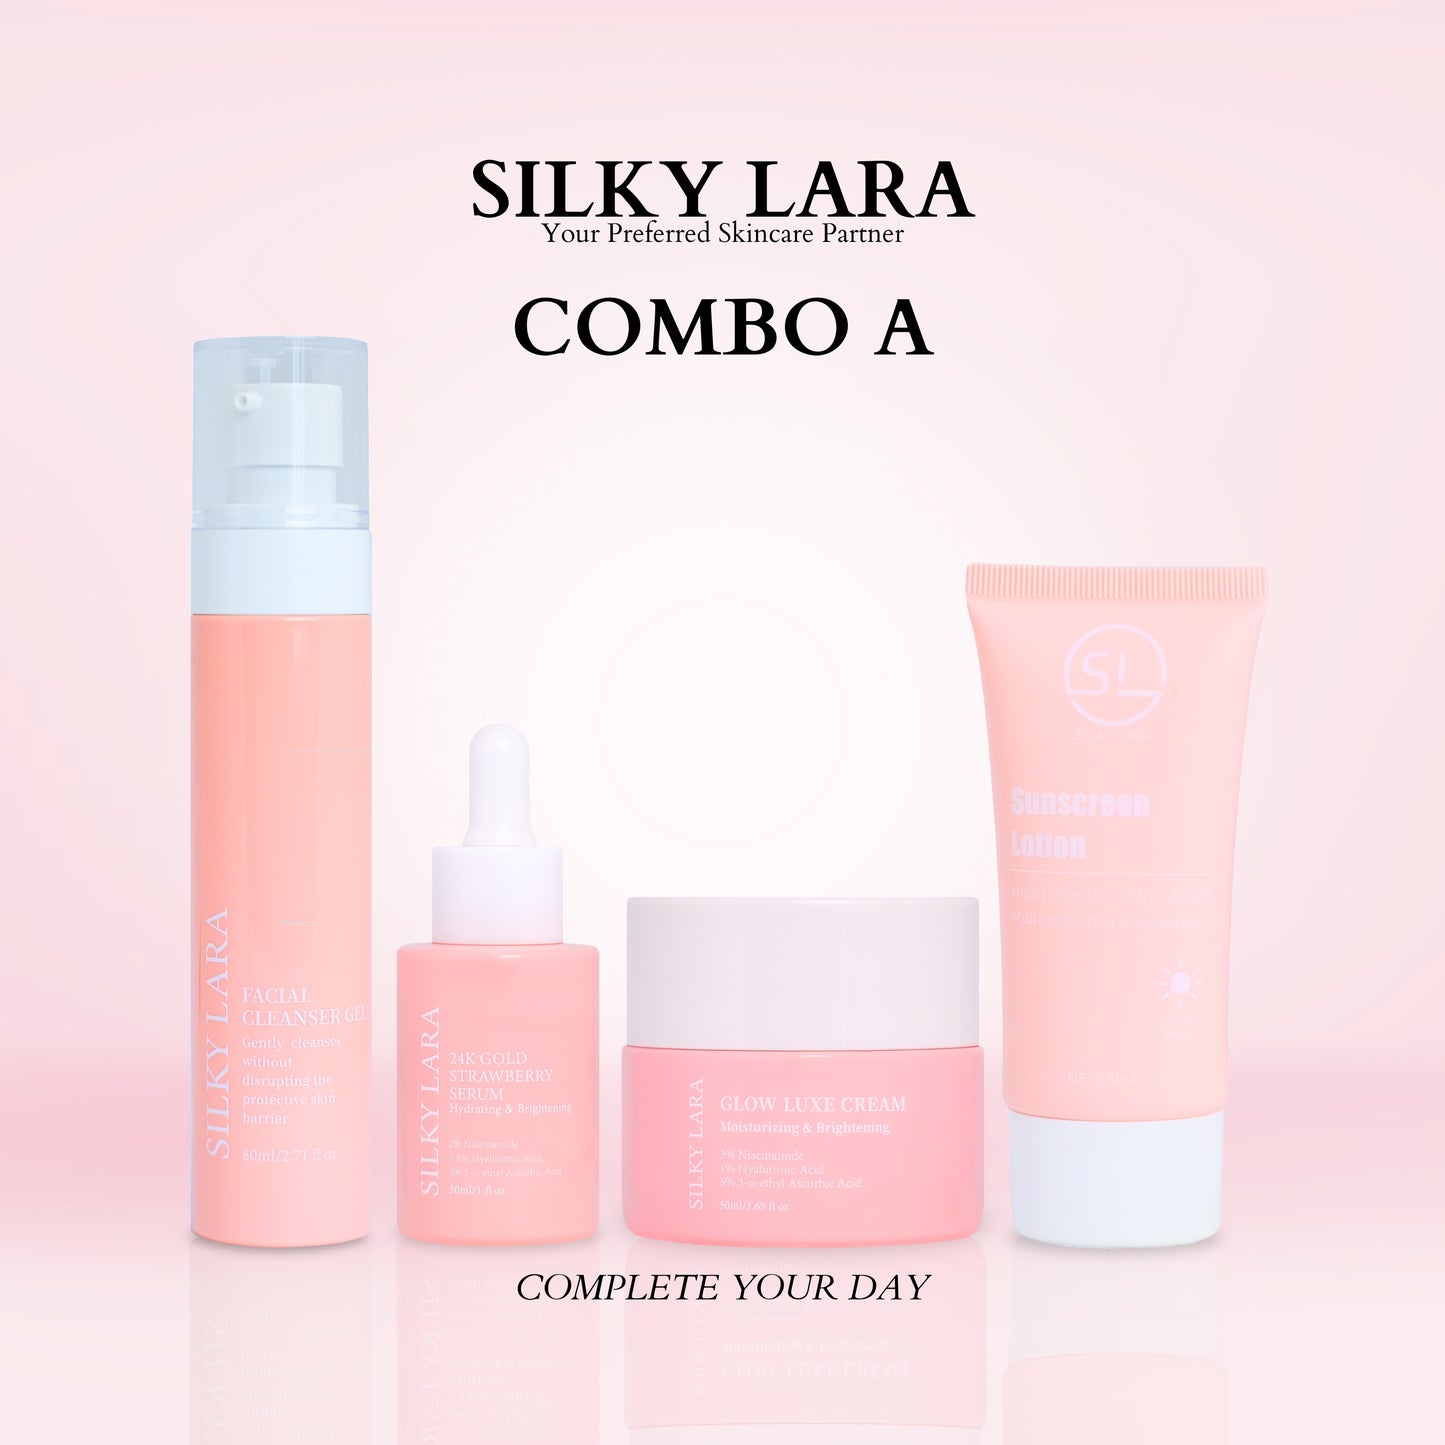 COMBO A : COMPLETE YOUR DAY (FACIAL CLEANSER 80ML, FACE SERUM 30ML, GLOW LUXE CREAM 50ML, SUNSCREEN 50ML)